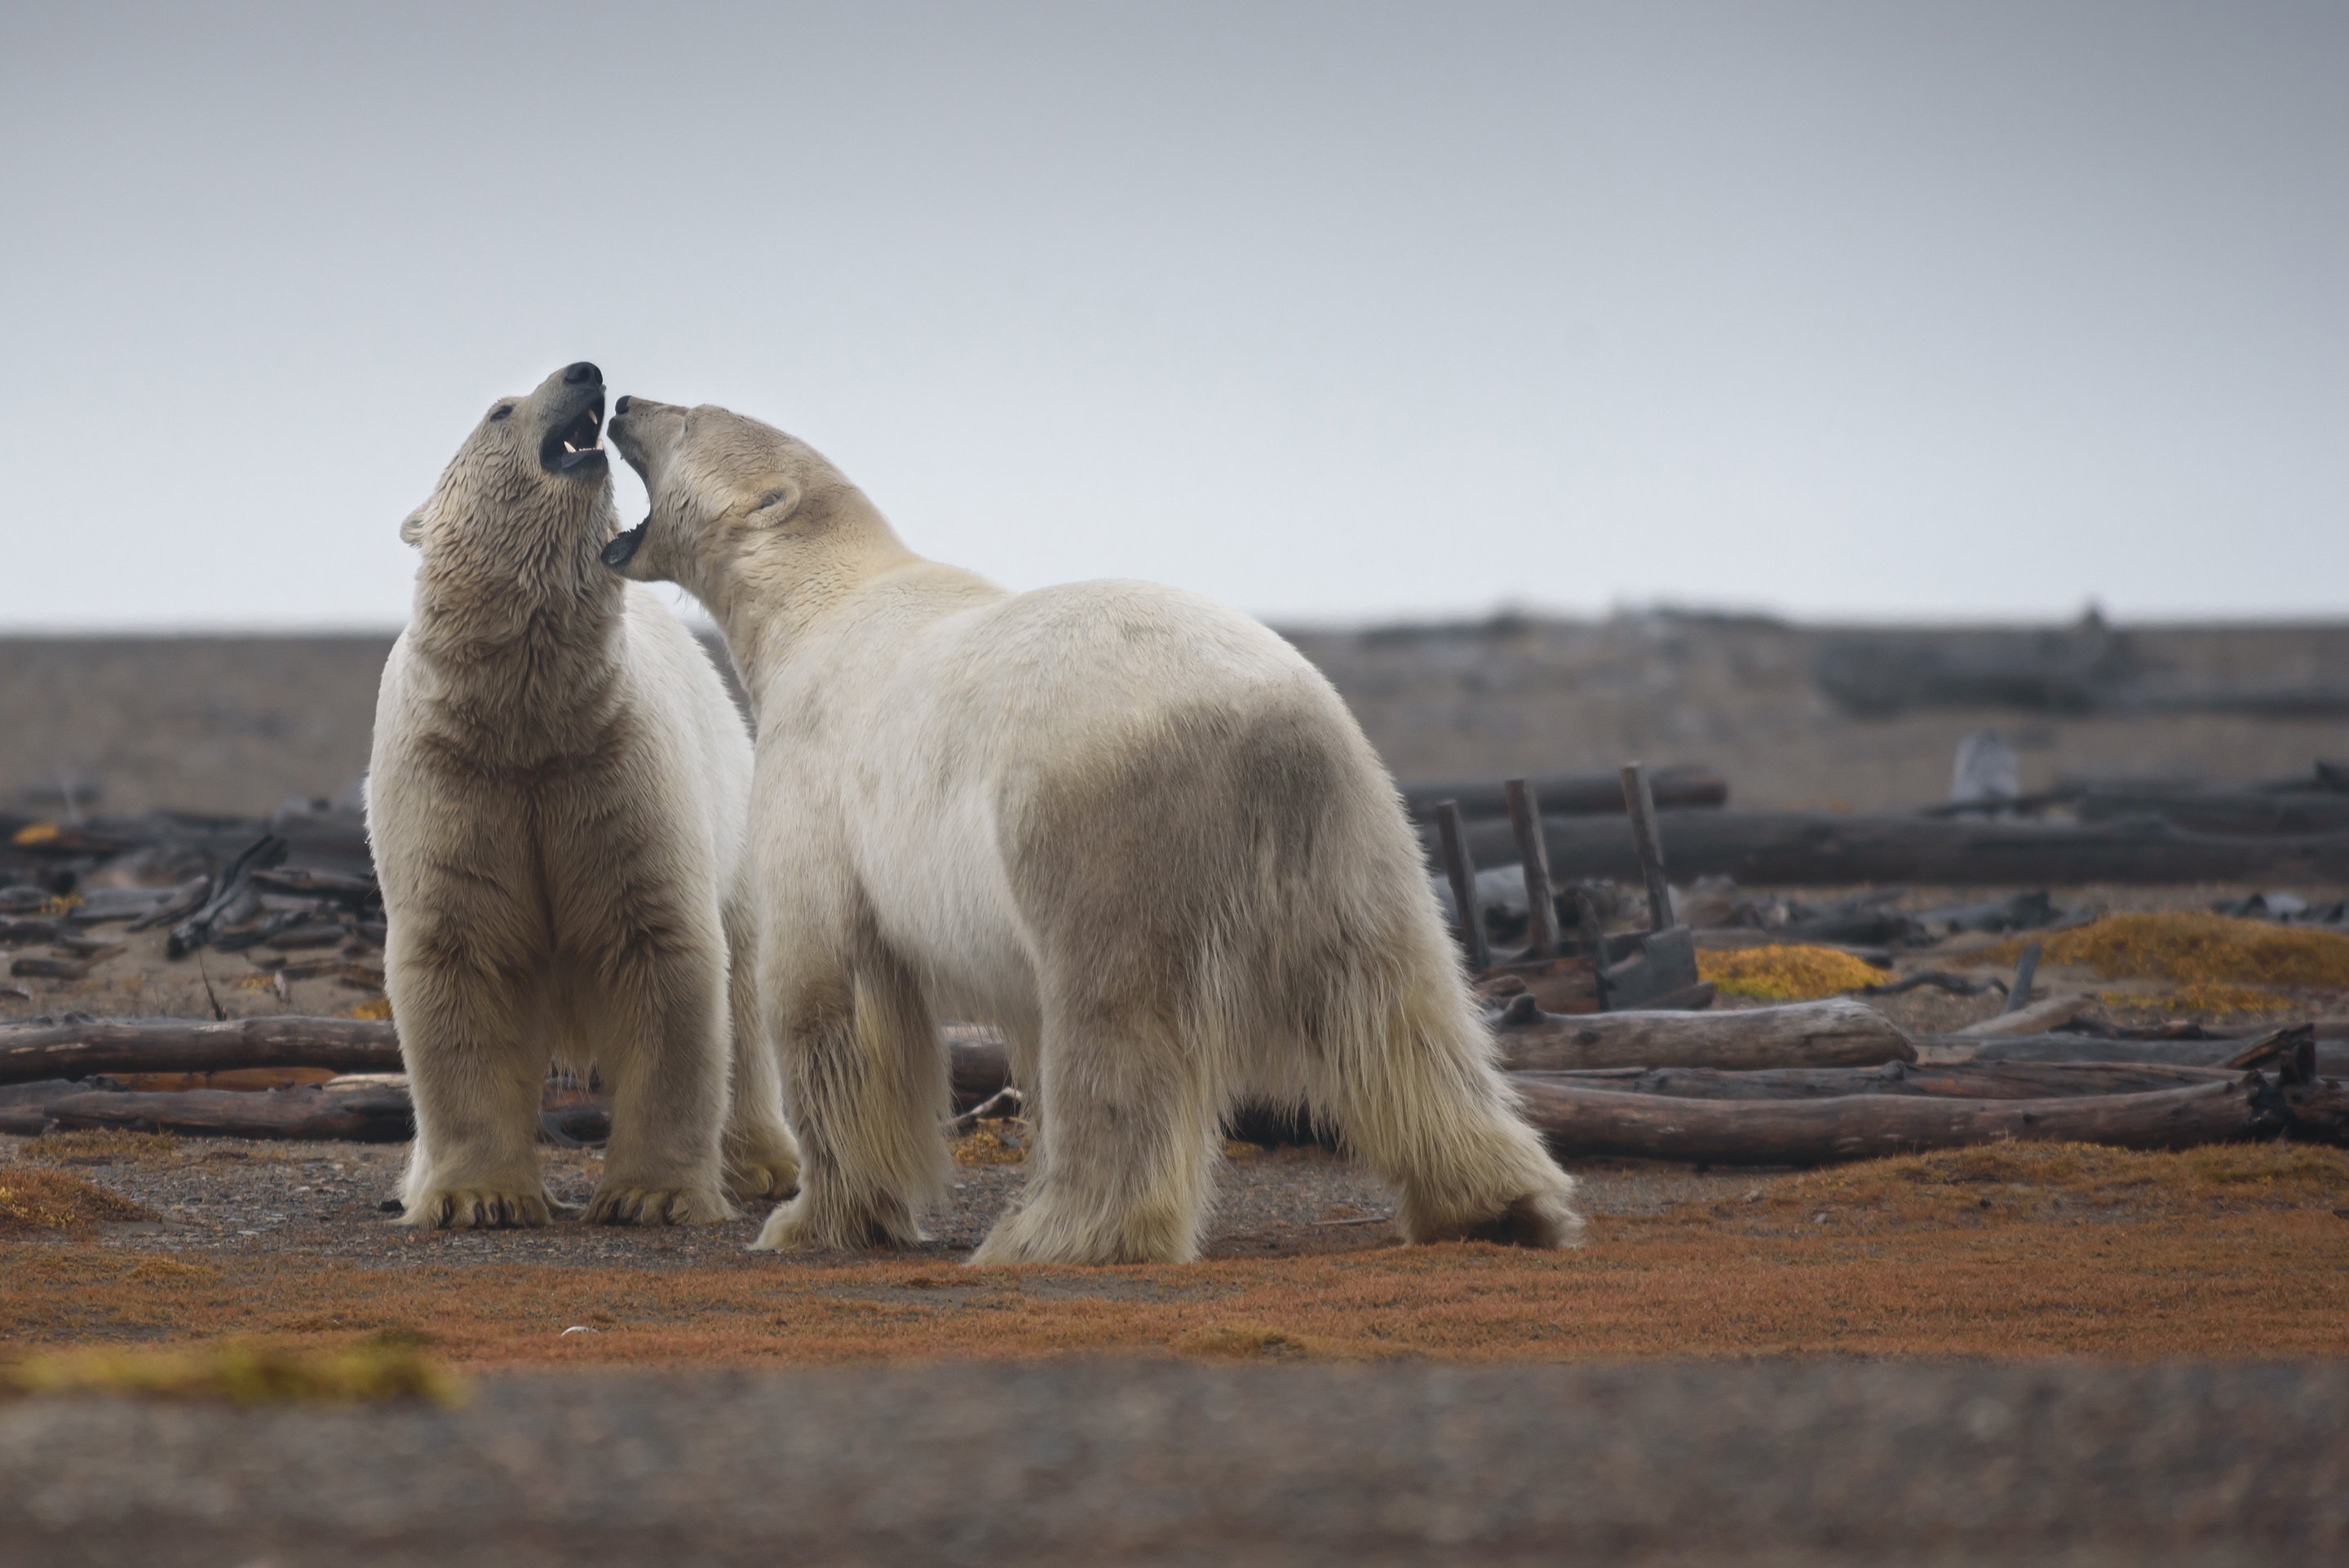 Two polar bears engaged in play fighting in the Arctic National Wildlife Refuge in Alaska.  Ritualized play fighting occurs between sub adult males to refine their hunting skills. (Jessica Matthews / The Washington Post)